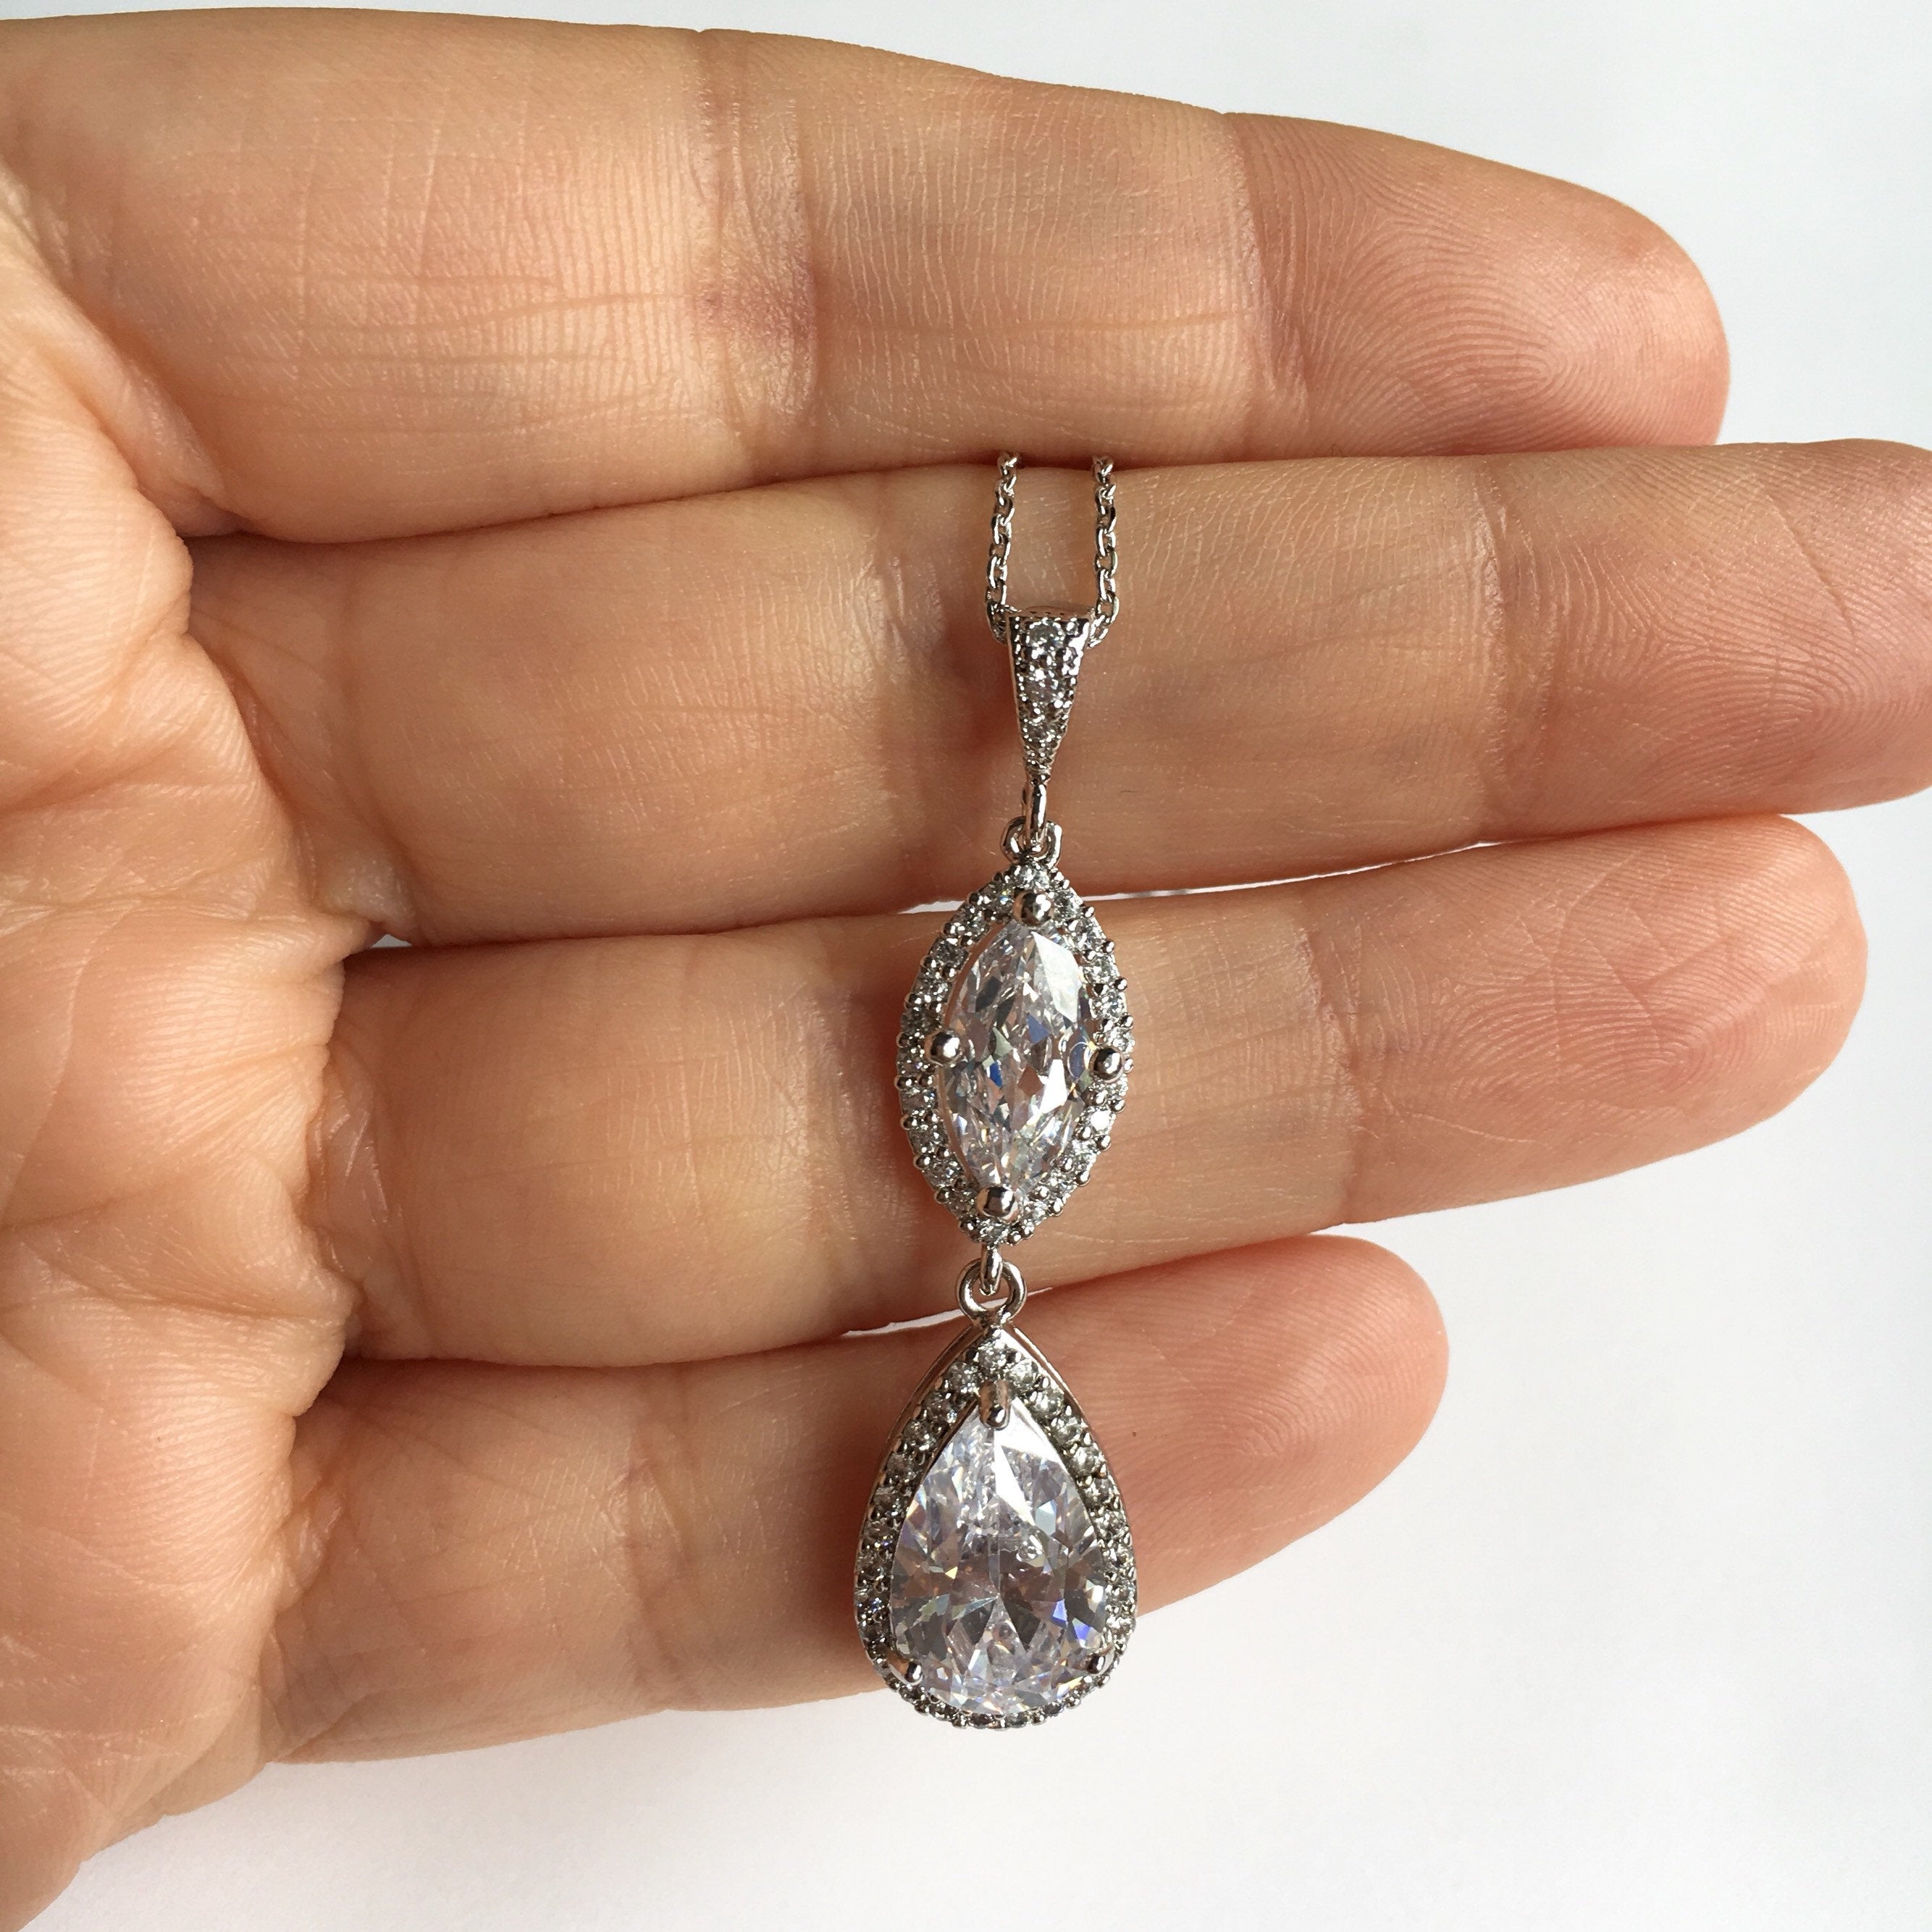 Cubic zirconia crystals set in silver color rhodium plated brass pendant necklace held in hand.